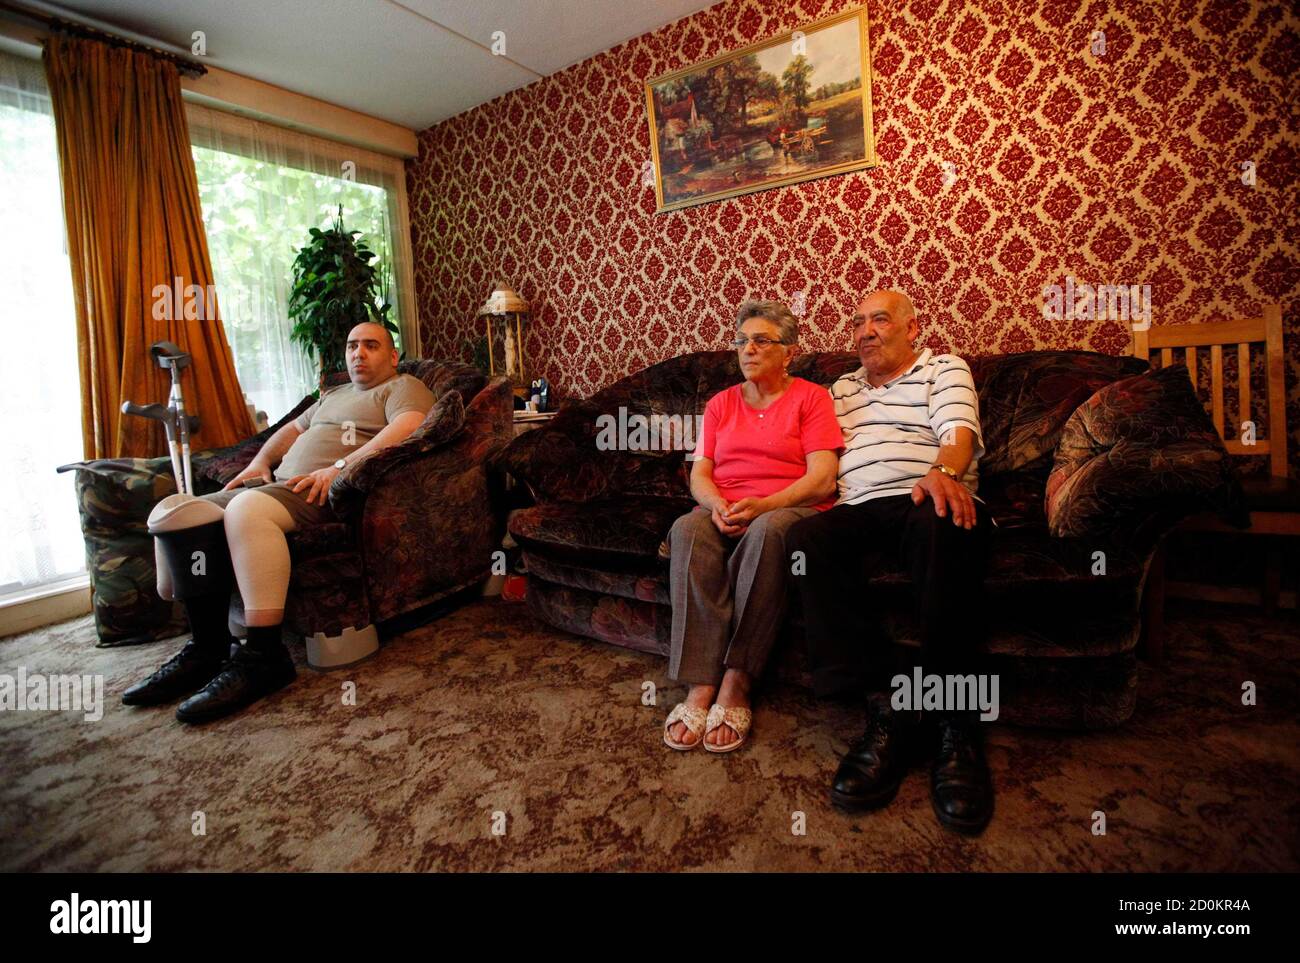 Oner Baduna, (L) his mother Nilgun (C) and his father Ismil watch television in their subsidised apartment near Elephant & Castle in London August 17, 2010. The British government is expected to cut England's social housing budget by 50 percent or more as part of a broad spending review, according to professional body the Chartered Institute of Housing (CIH). The coalition of Conservatives and Liberal Democrats will announce details of its spending review on Wednesday. The aim is to reduce the budget deficit from almost 11 percent of gross domestic product (GDP) to almost nothing in four years Stock Photo